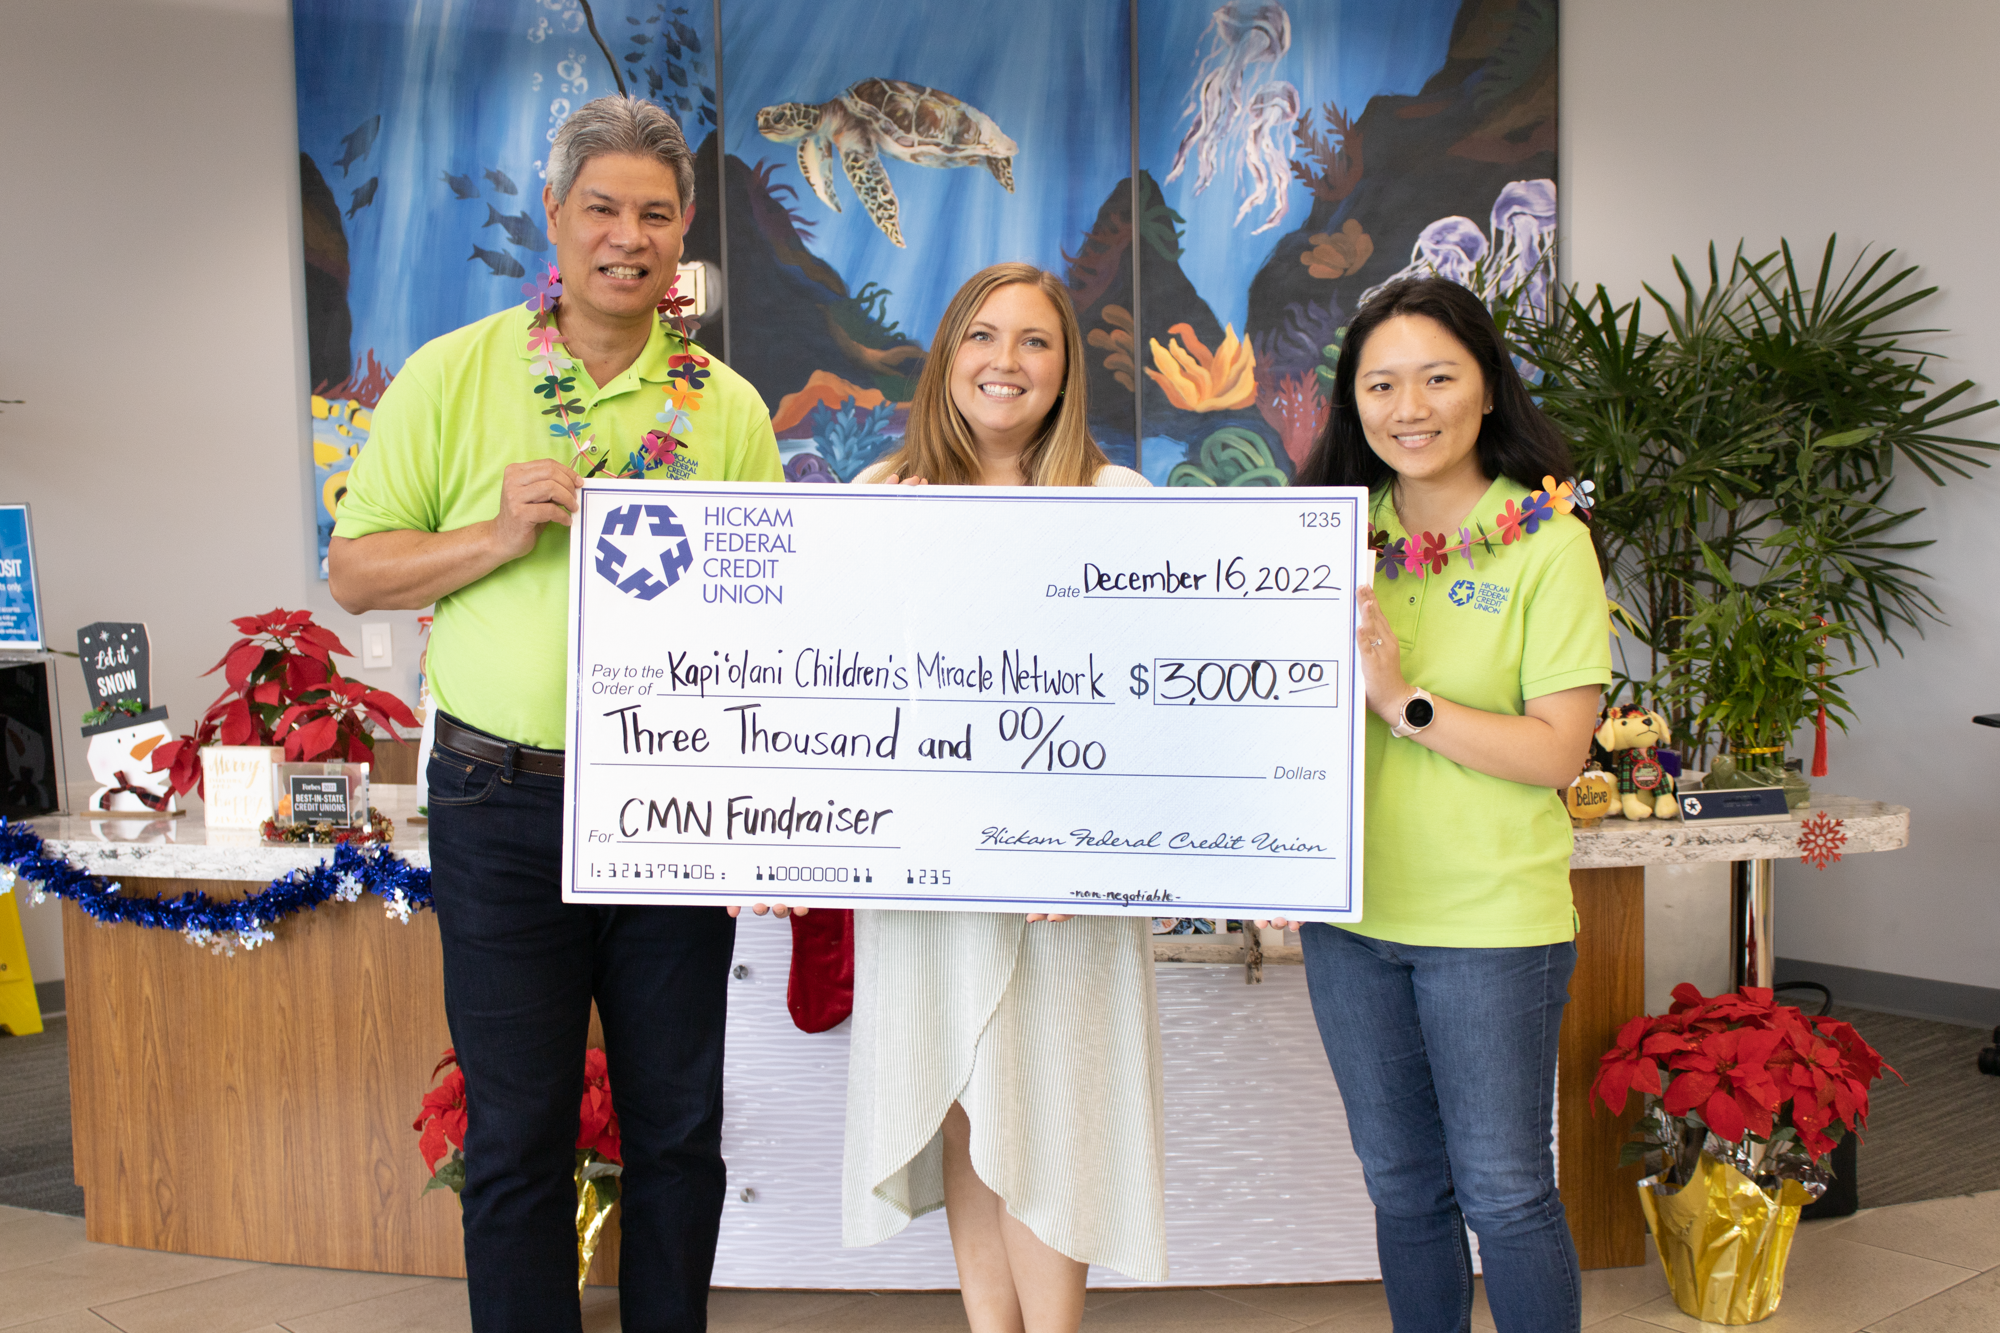 Scott Kaulukukui poses with Colette Forcier of Kapi'olani Children's Miracle Network and a staff member with donation check